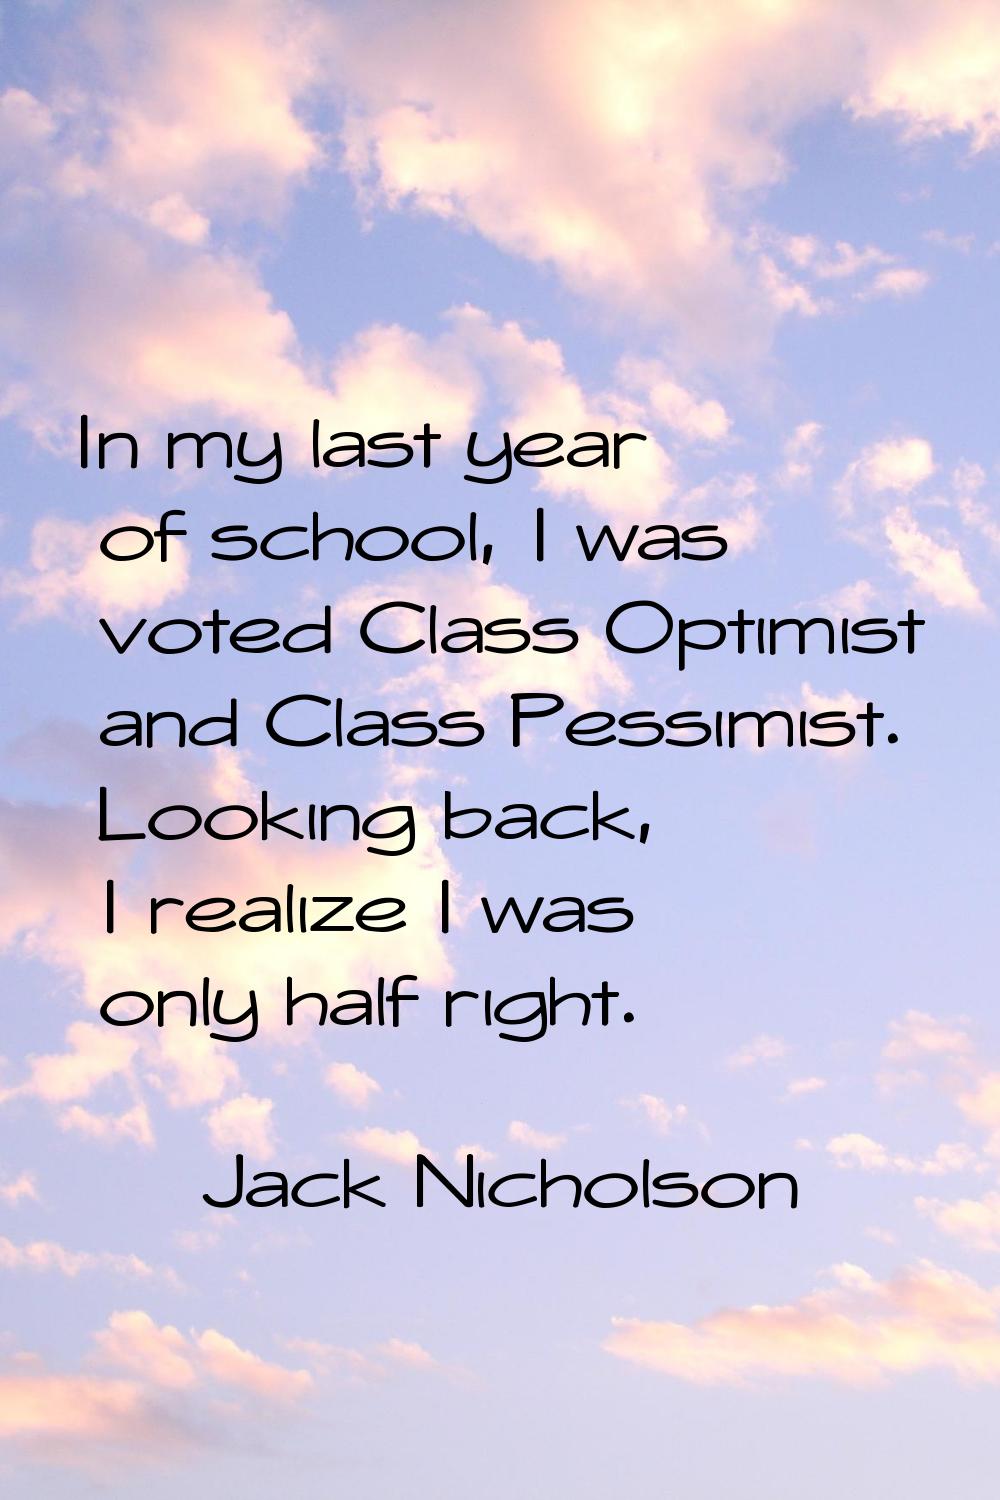 In my last year of school, I was voted Class Optimist and Class Pessimist. Looking back, I realize 